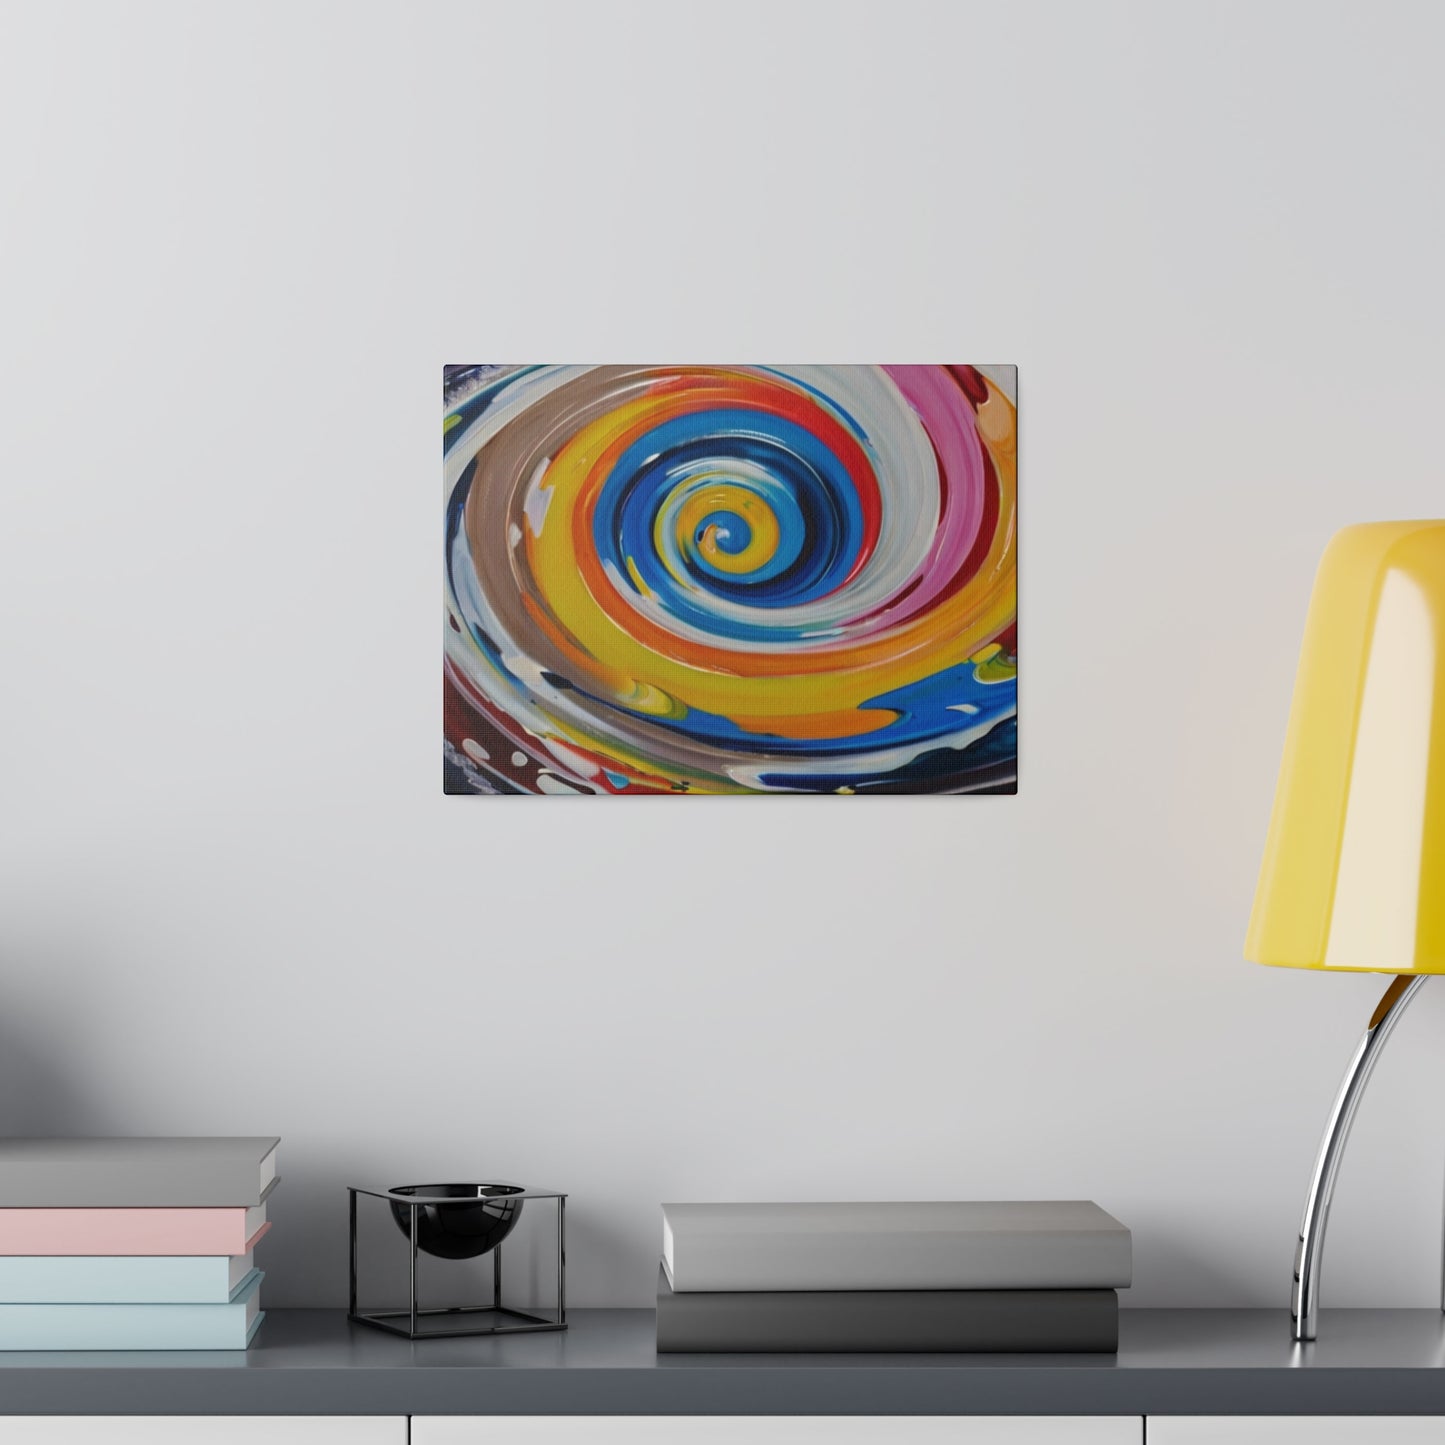 Colourful Messy Whirlpool - Matte Canvas, Stretched, 0.75"